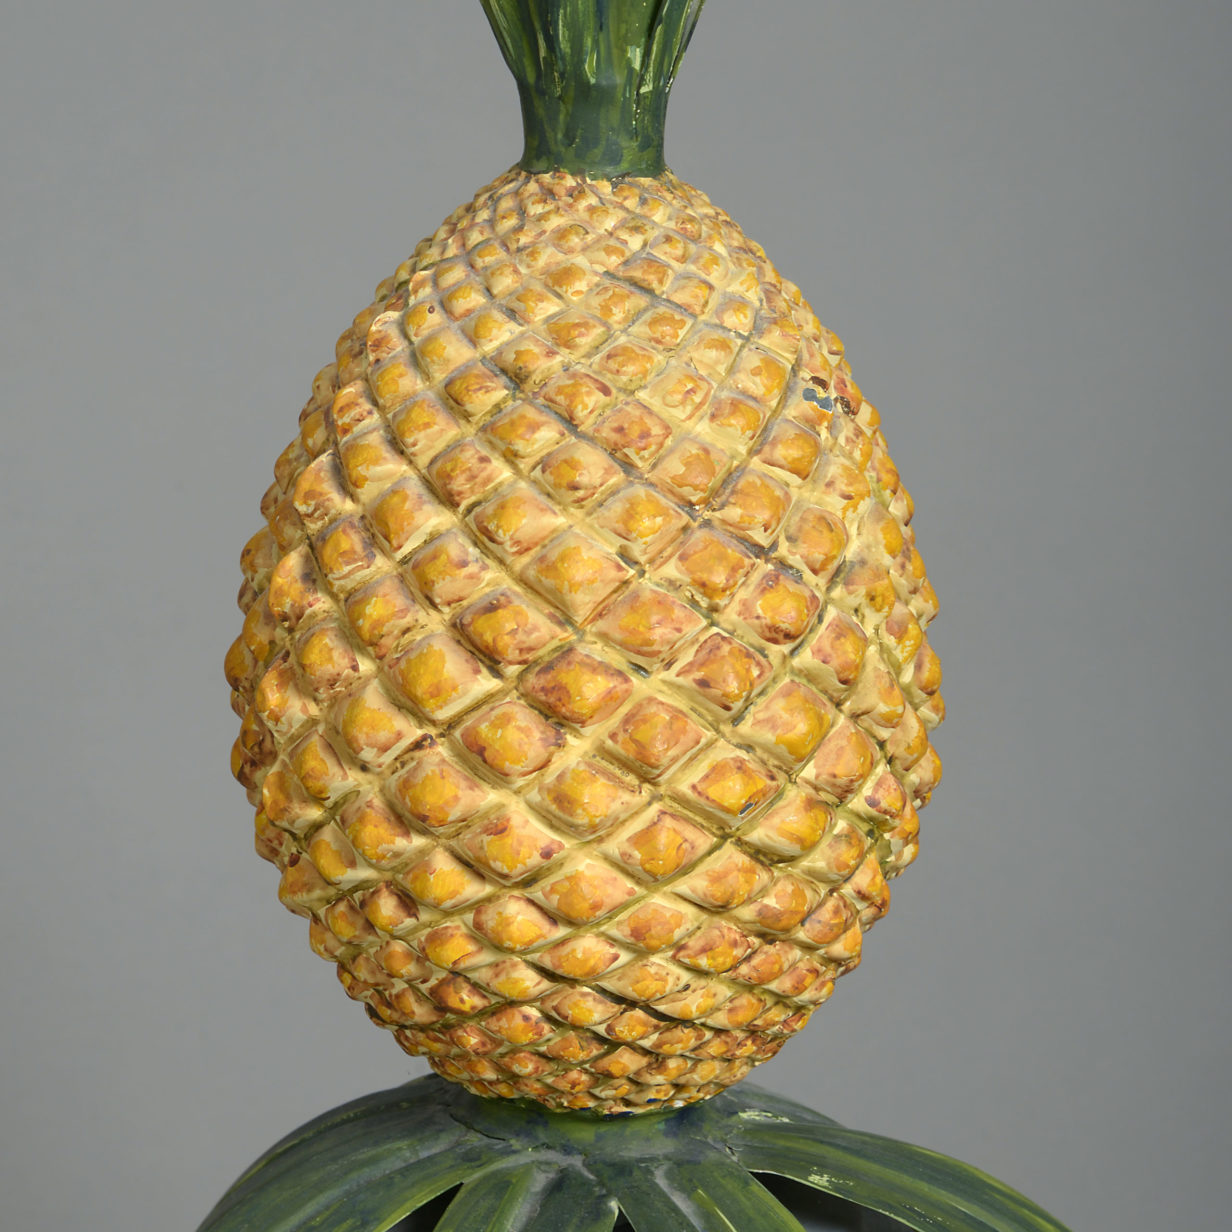 Mid-20th century tole pineapple finial